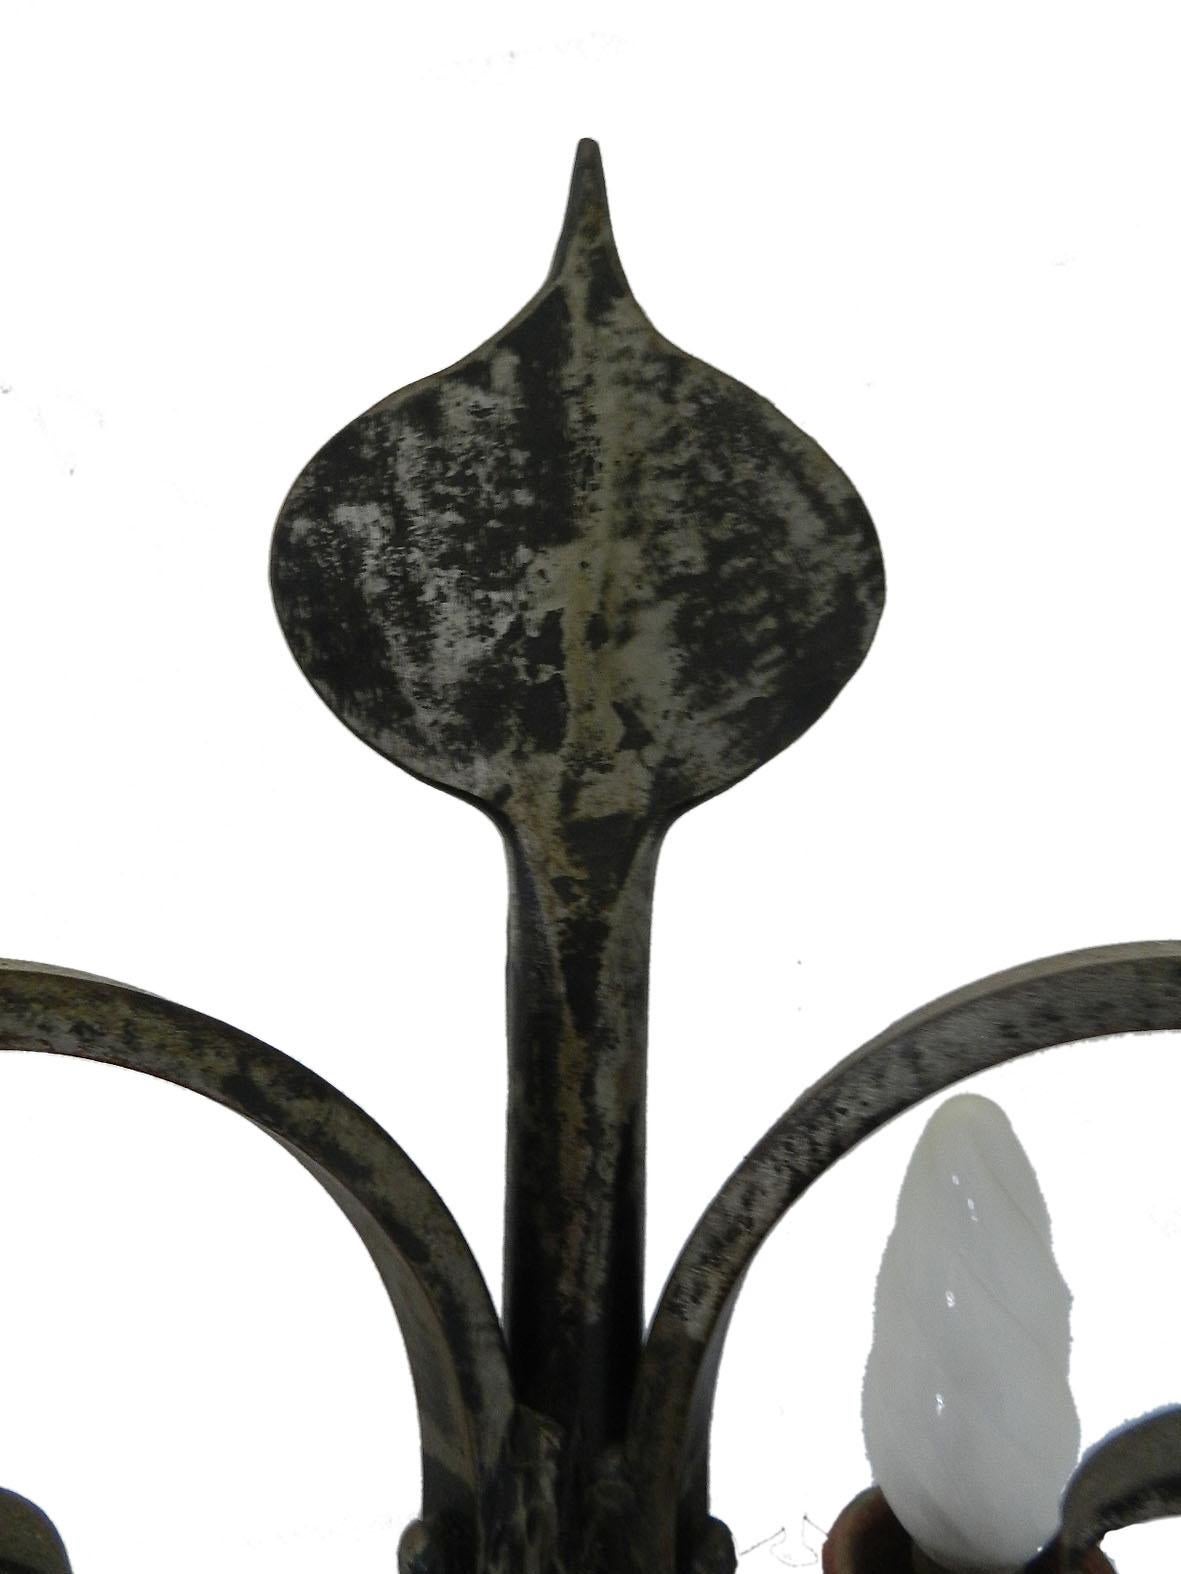 Gothic Revival Spanish Wrought Iron Floor Lamp Artisan Made One of a Kind, circa 1960